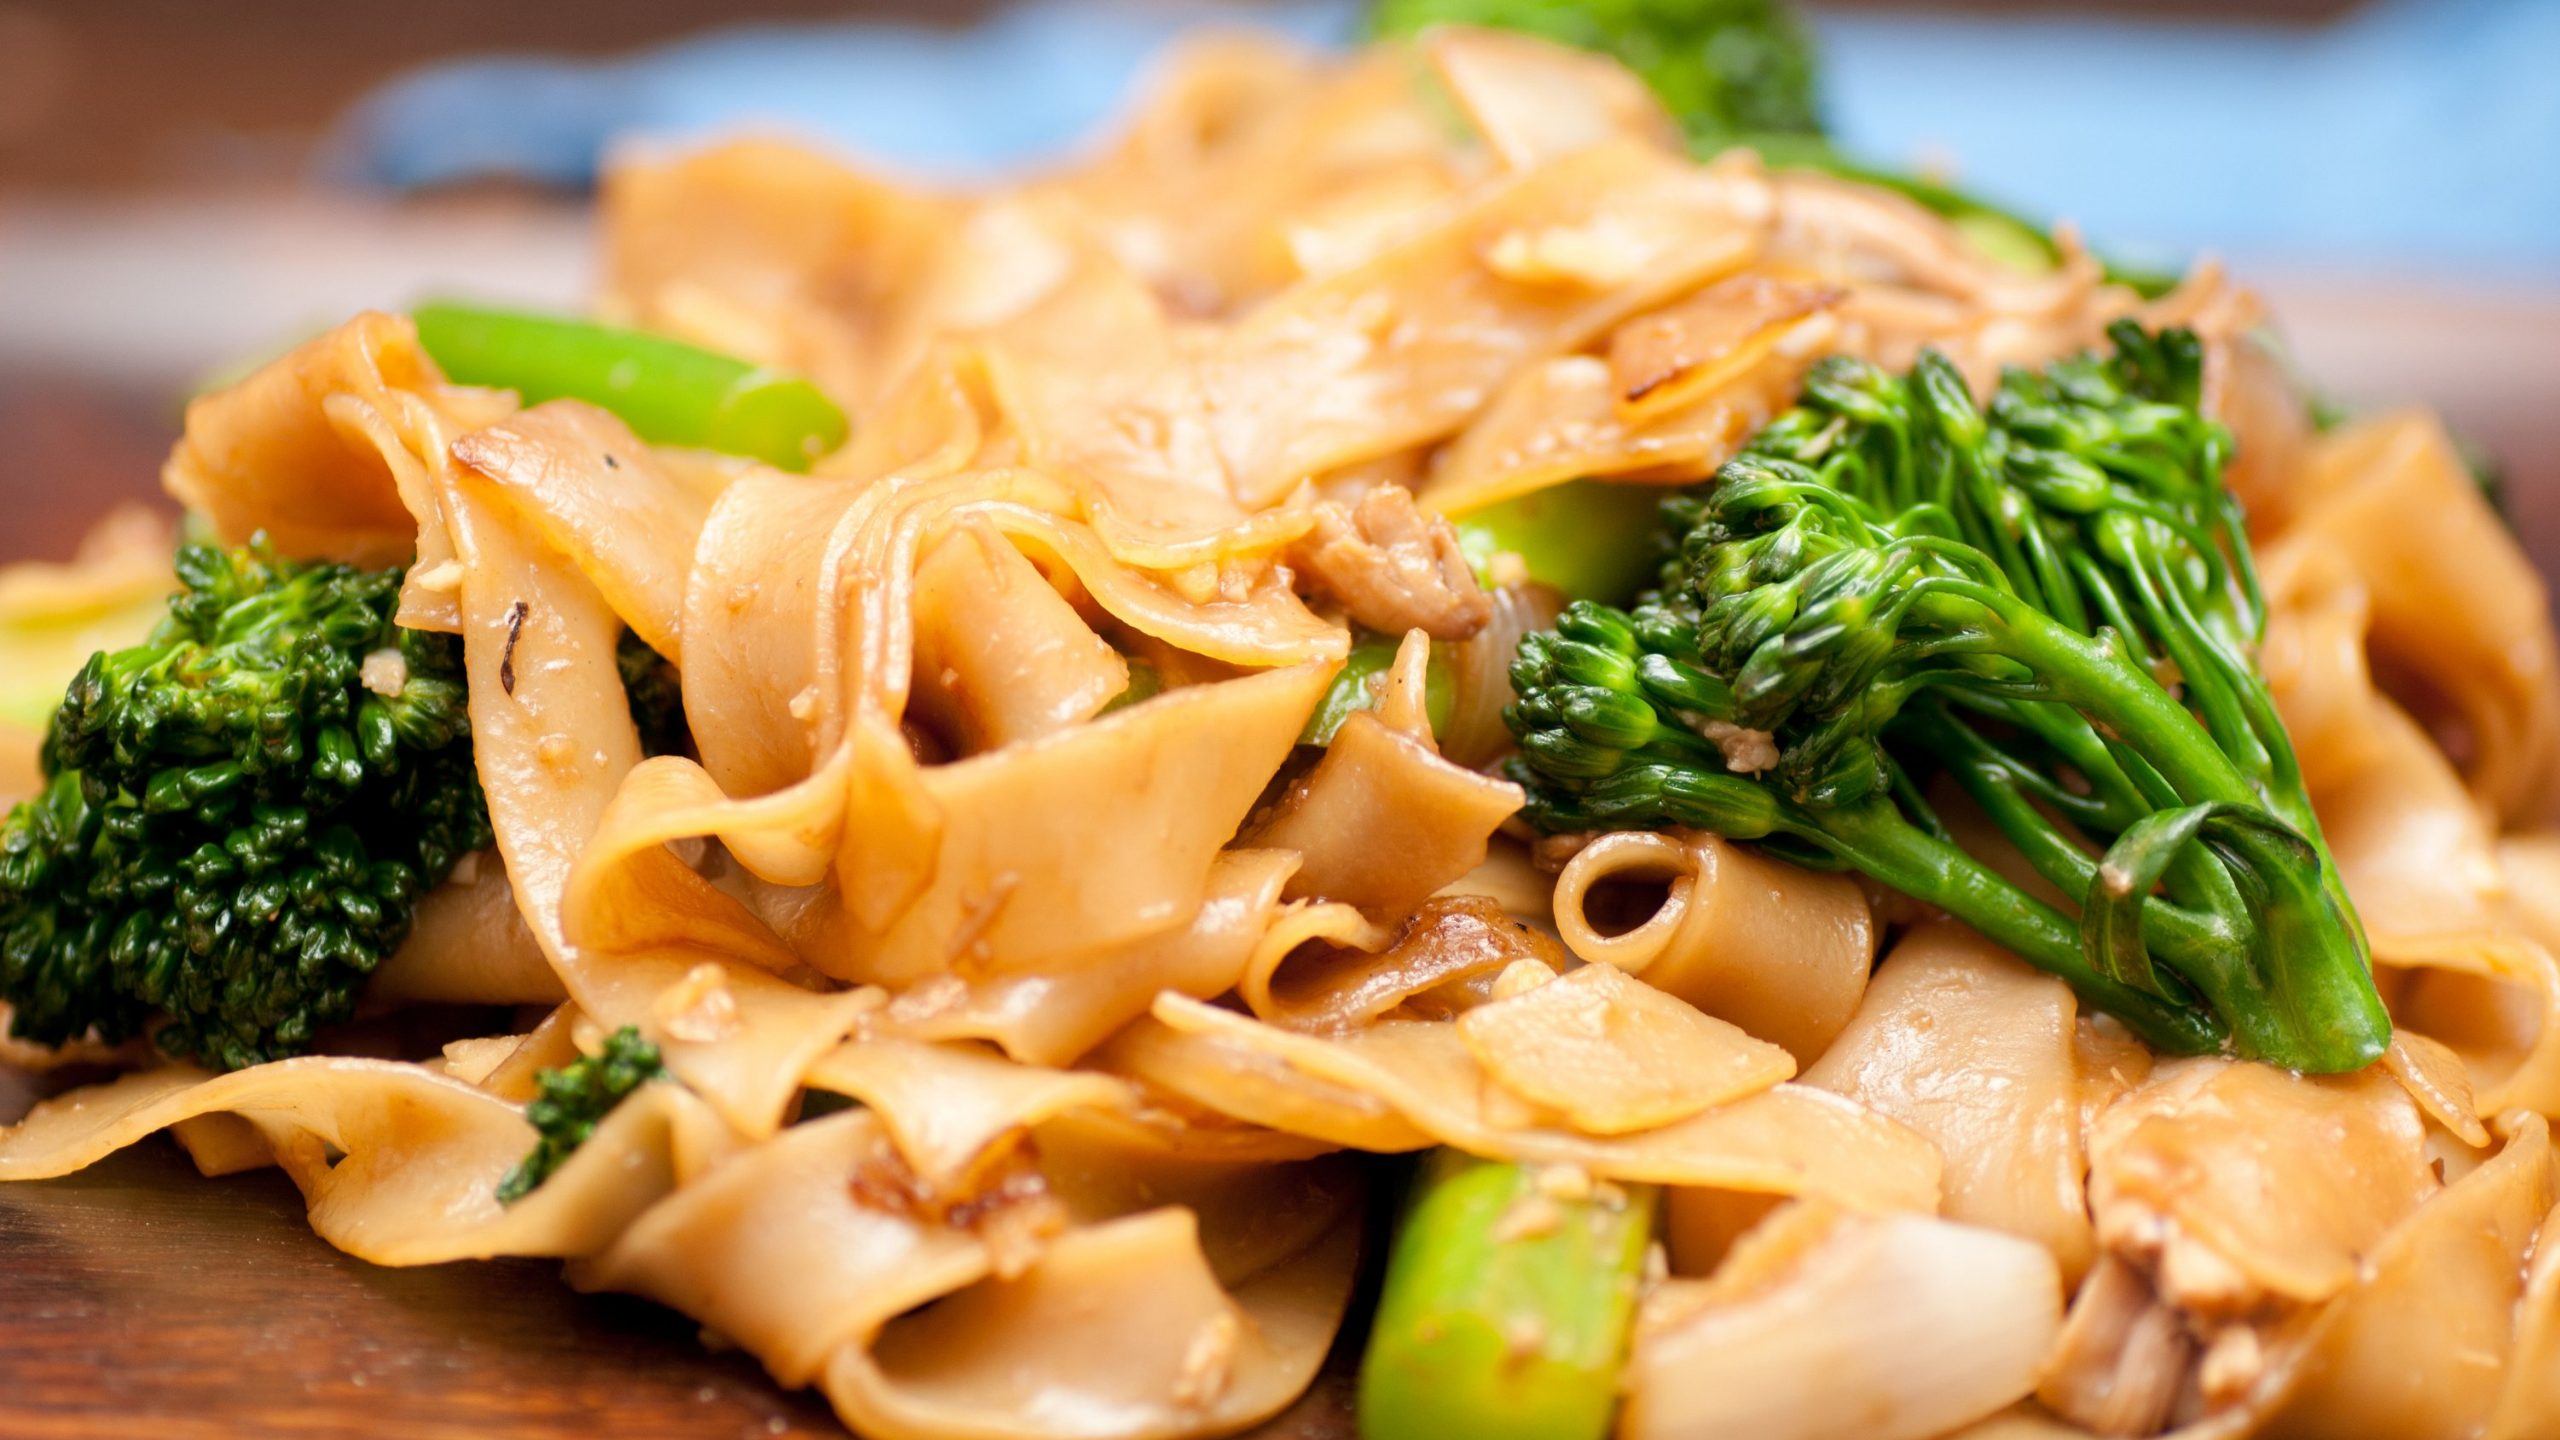 Peanut Allergy These 9 Thai Food Tips Should Satisfy You